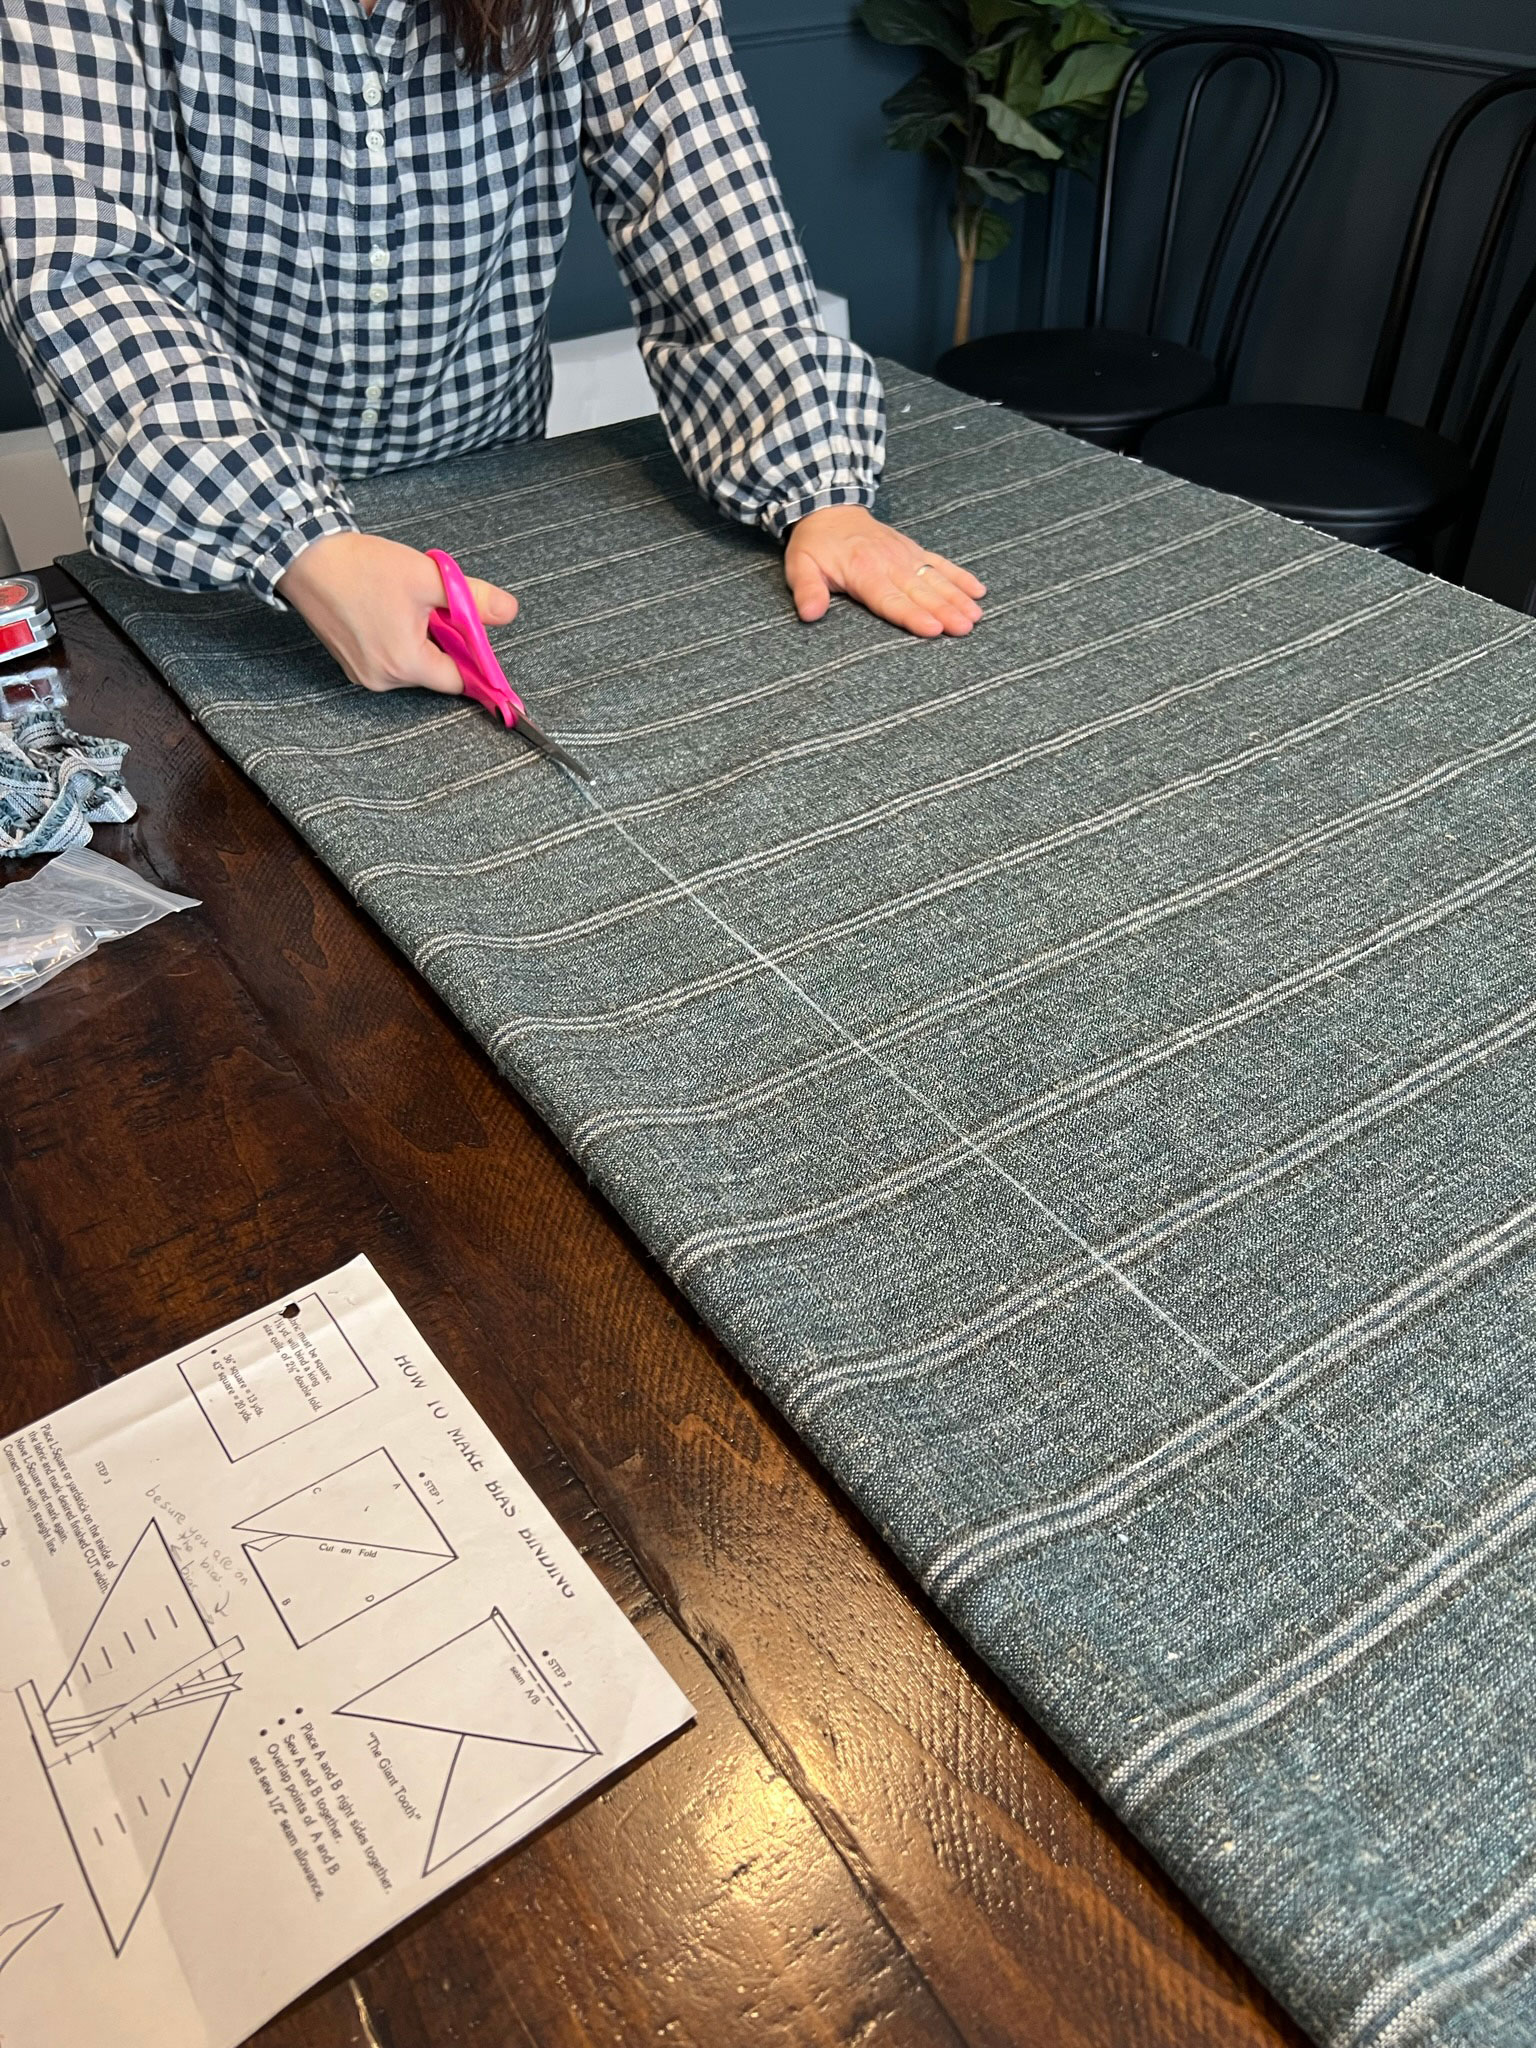 Cutting fabric along a line that is drawn on fabric